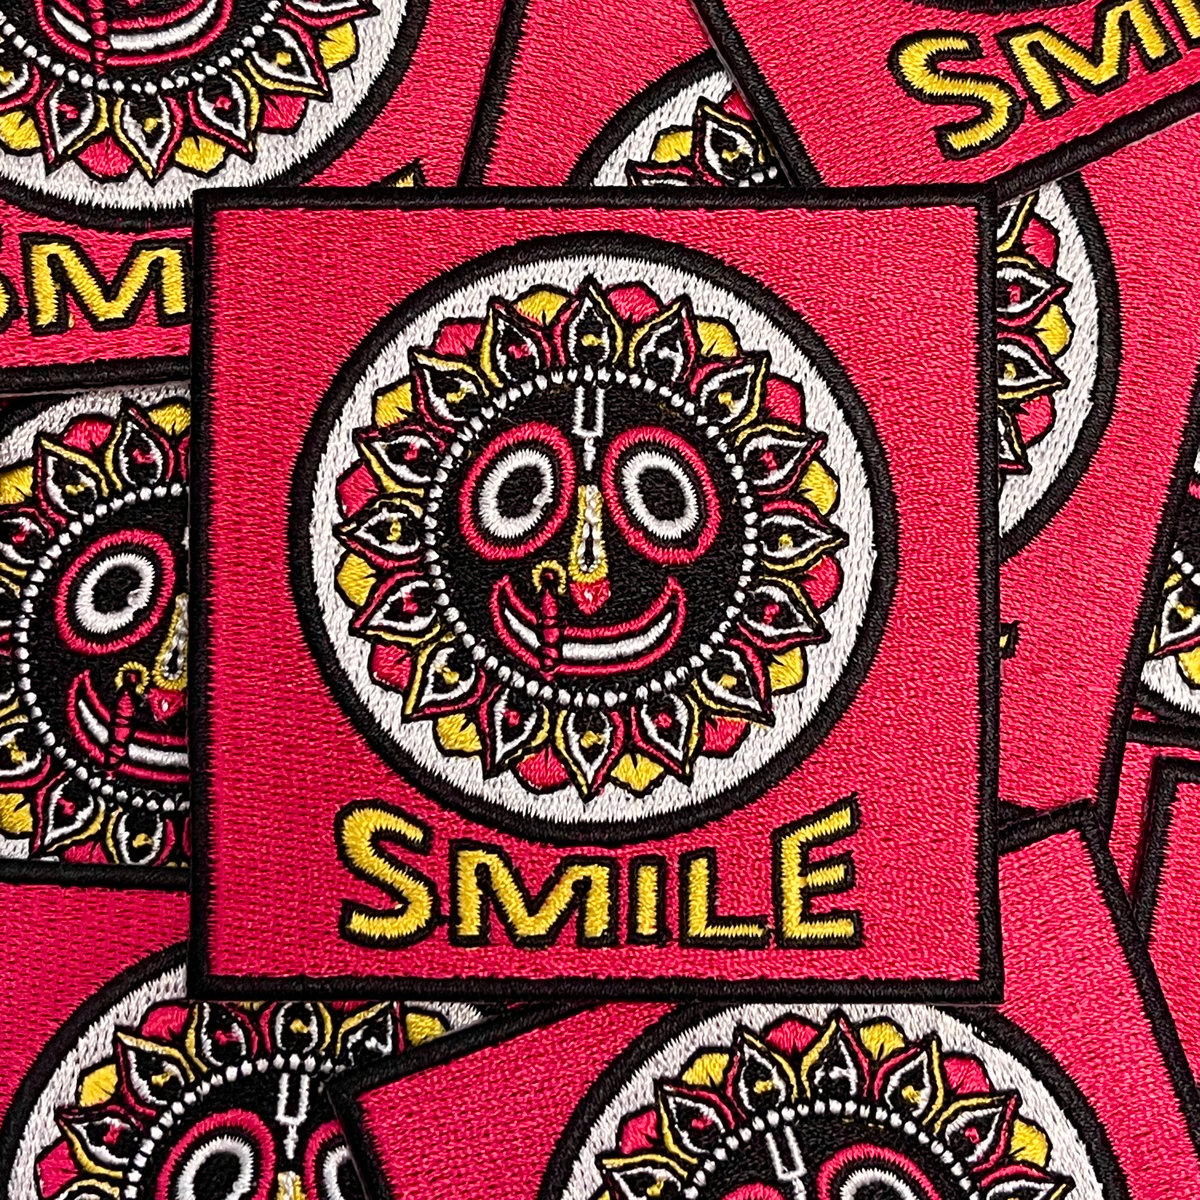 SMILE Embroidered Patch! - 3” inches 